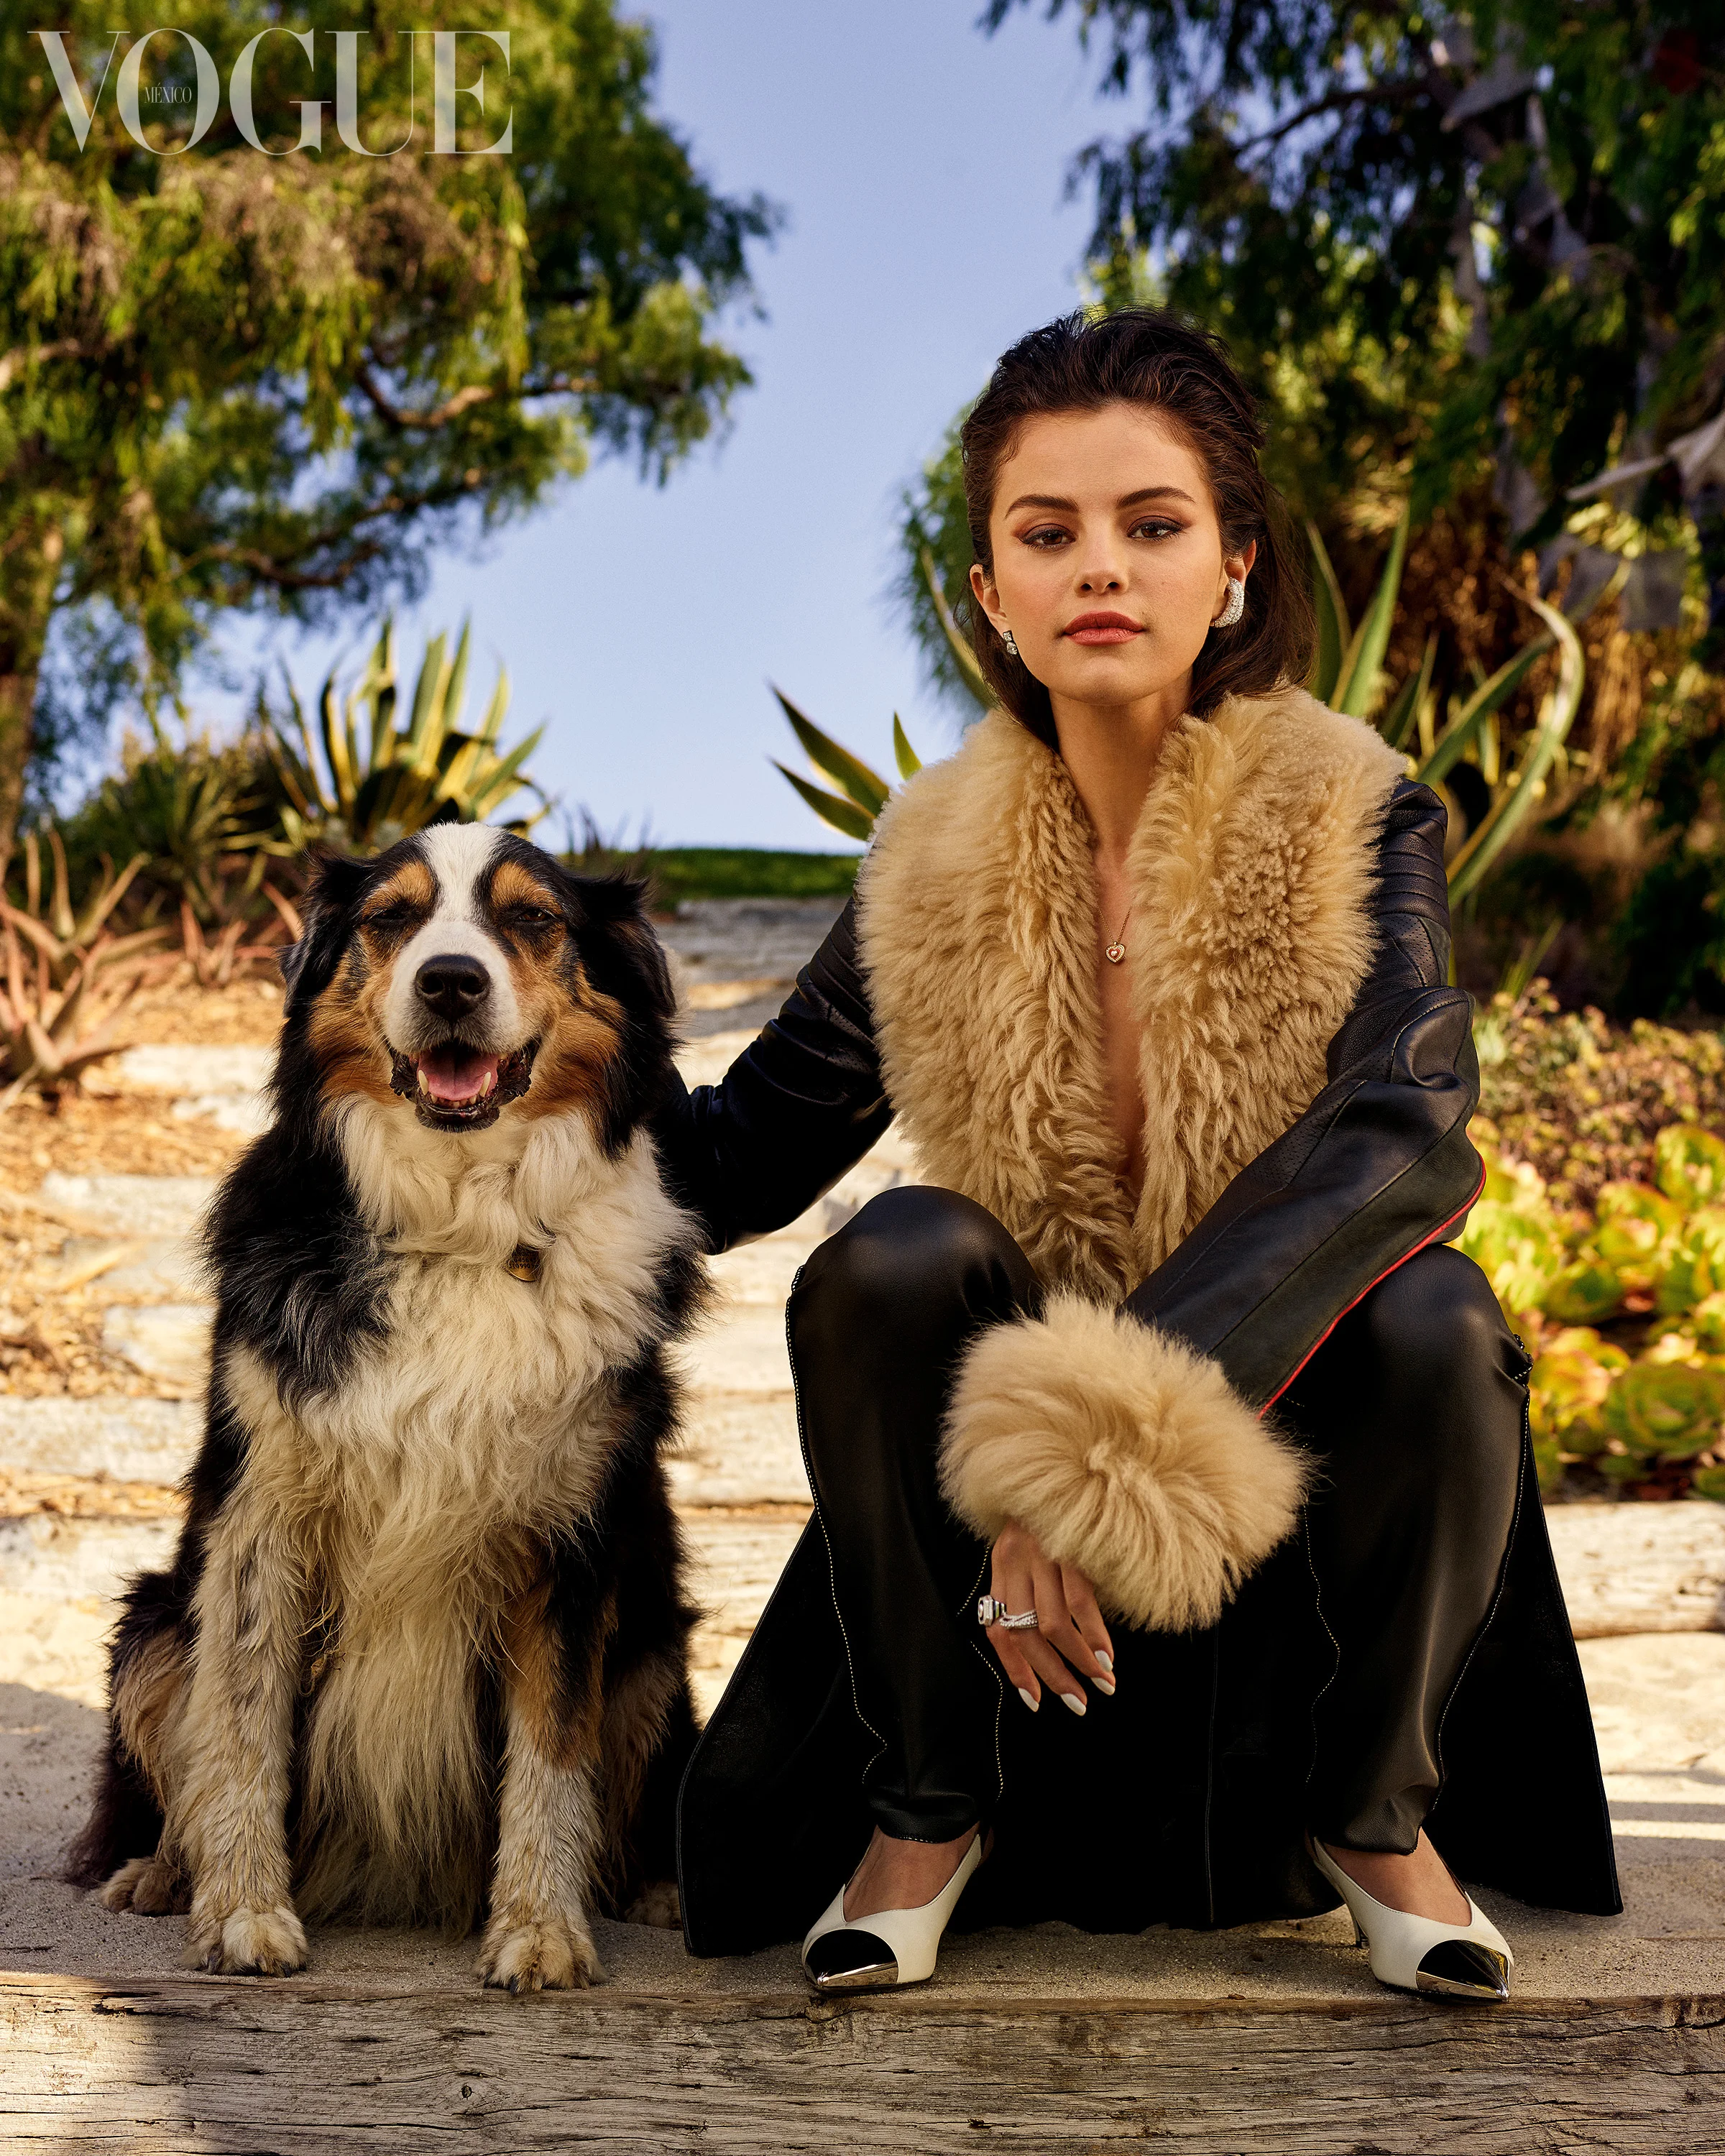 People 2400x3000 Selena Gomez celebrity actress singer women fur dark hair brunette Latinas dog women with dogs sitting Vogue Mexico frontal view American women painted nails looking at viewer women outdoors animals